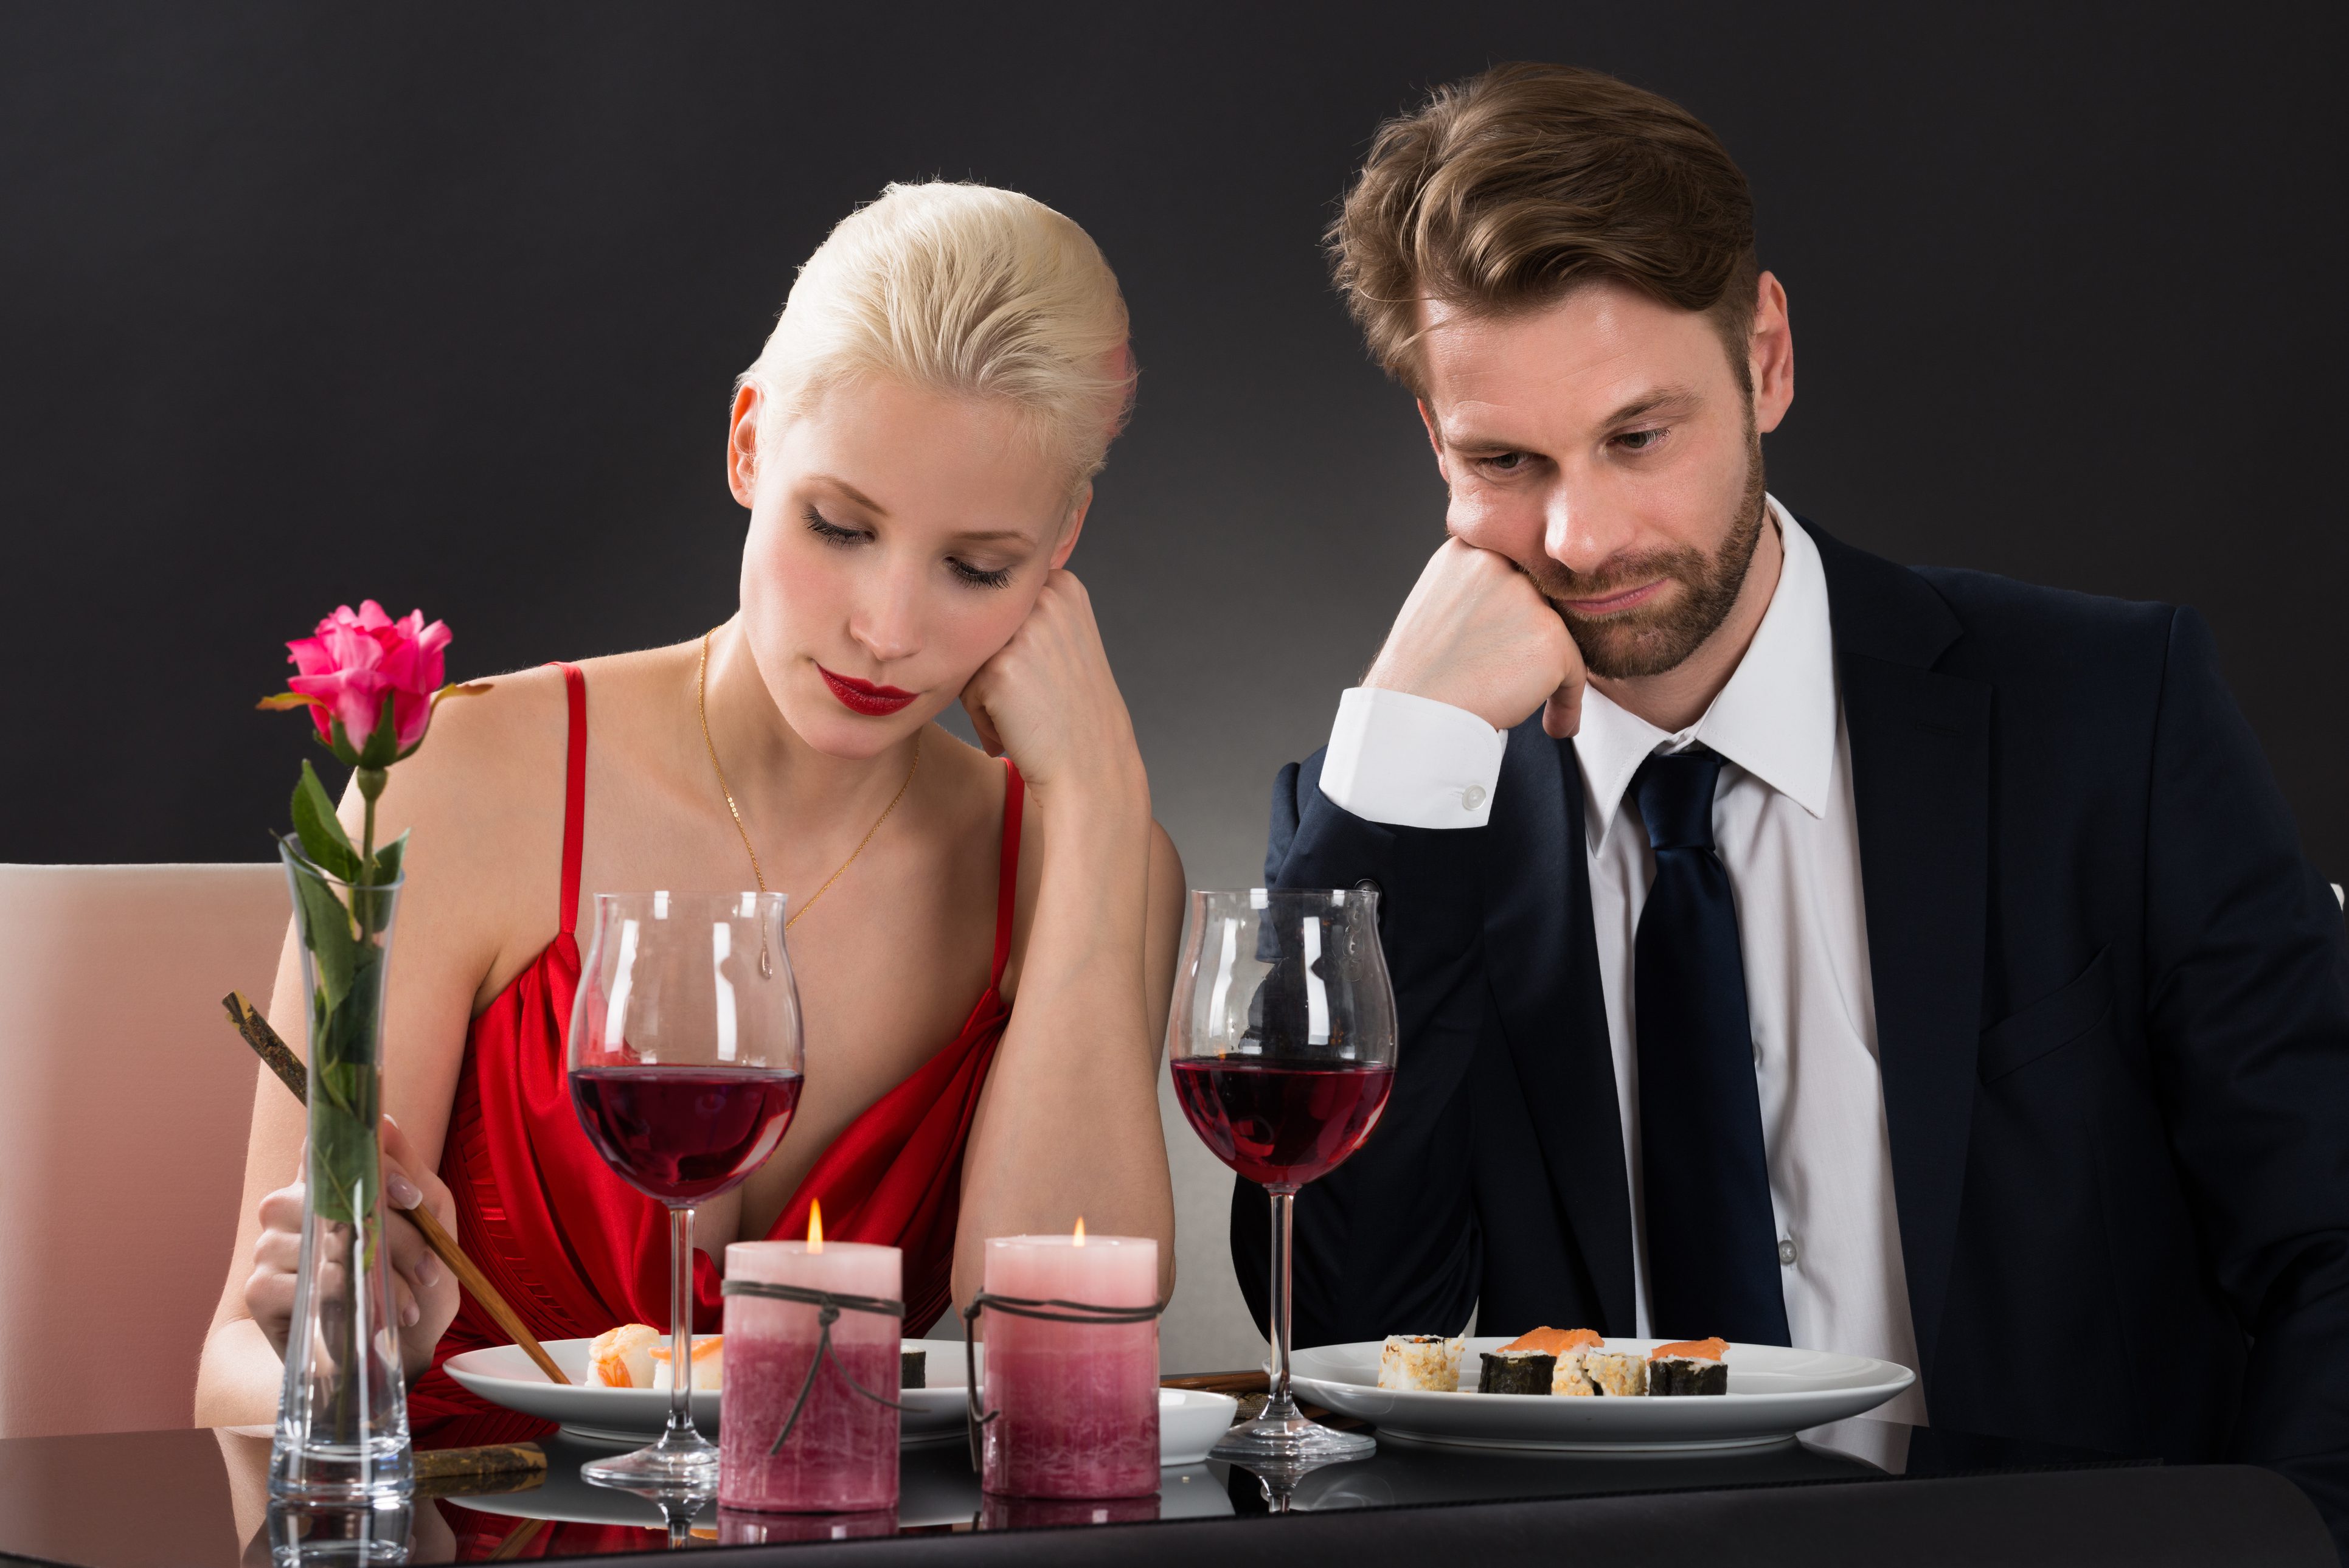 Online Dating: What Do You Do When You Know It's A "No" Immediately Upon Meeting Them On A Date?